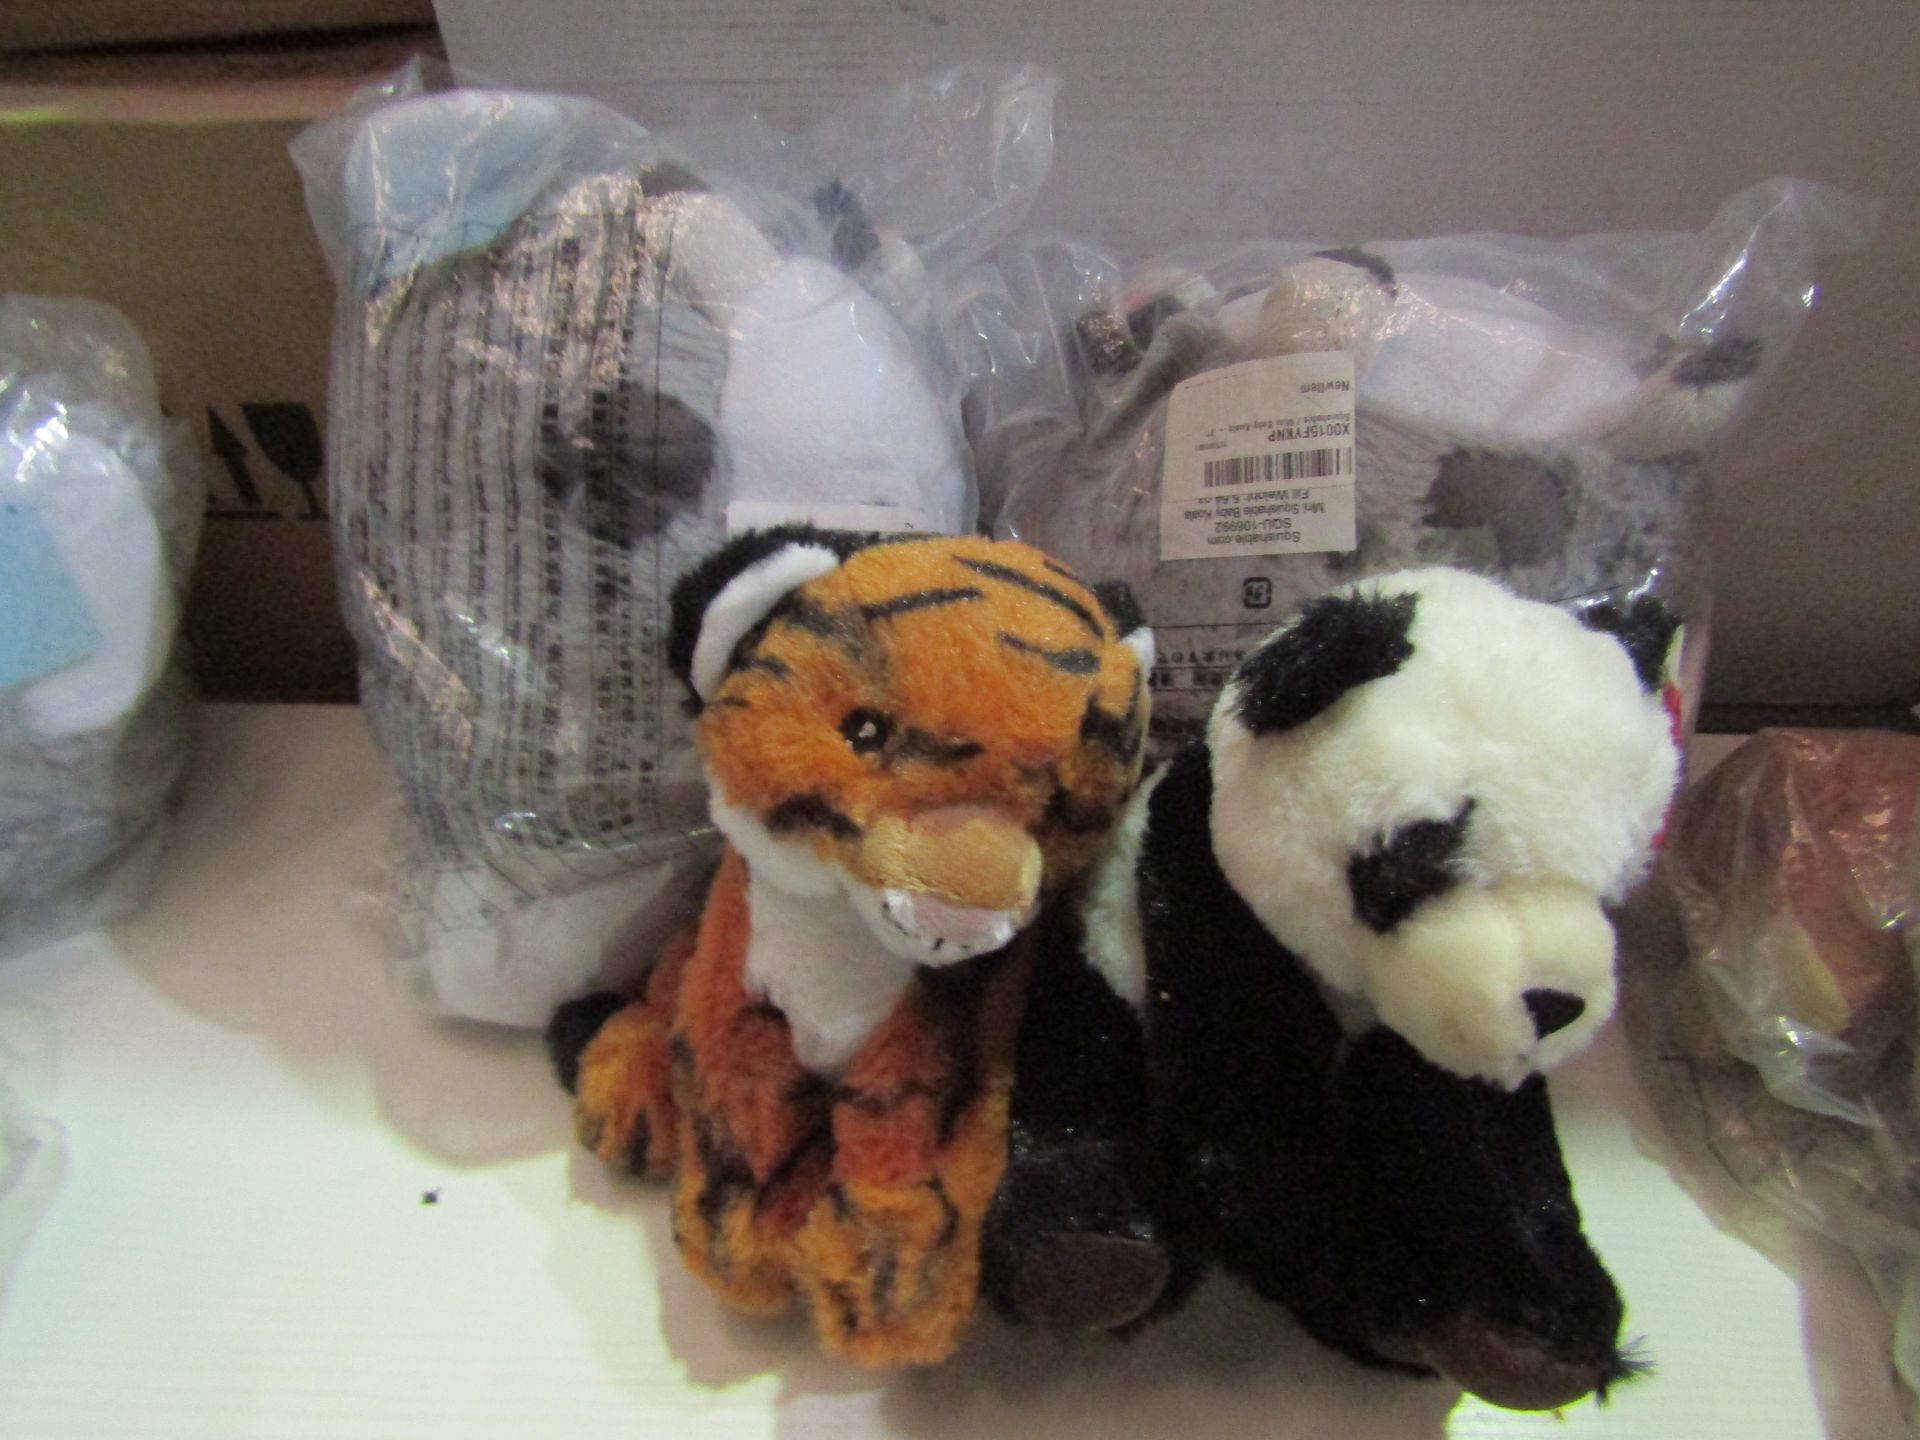 4 X Soft Toys Being 2 X Keel Toys Panda & Tiger & 2 X Squishable "s All new With Tags